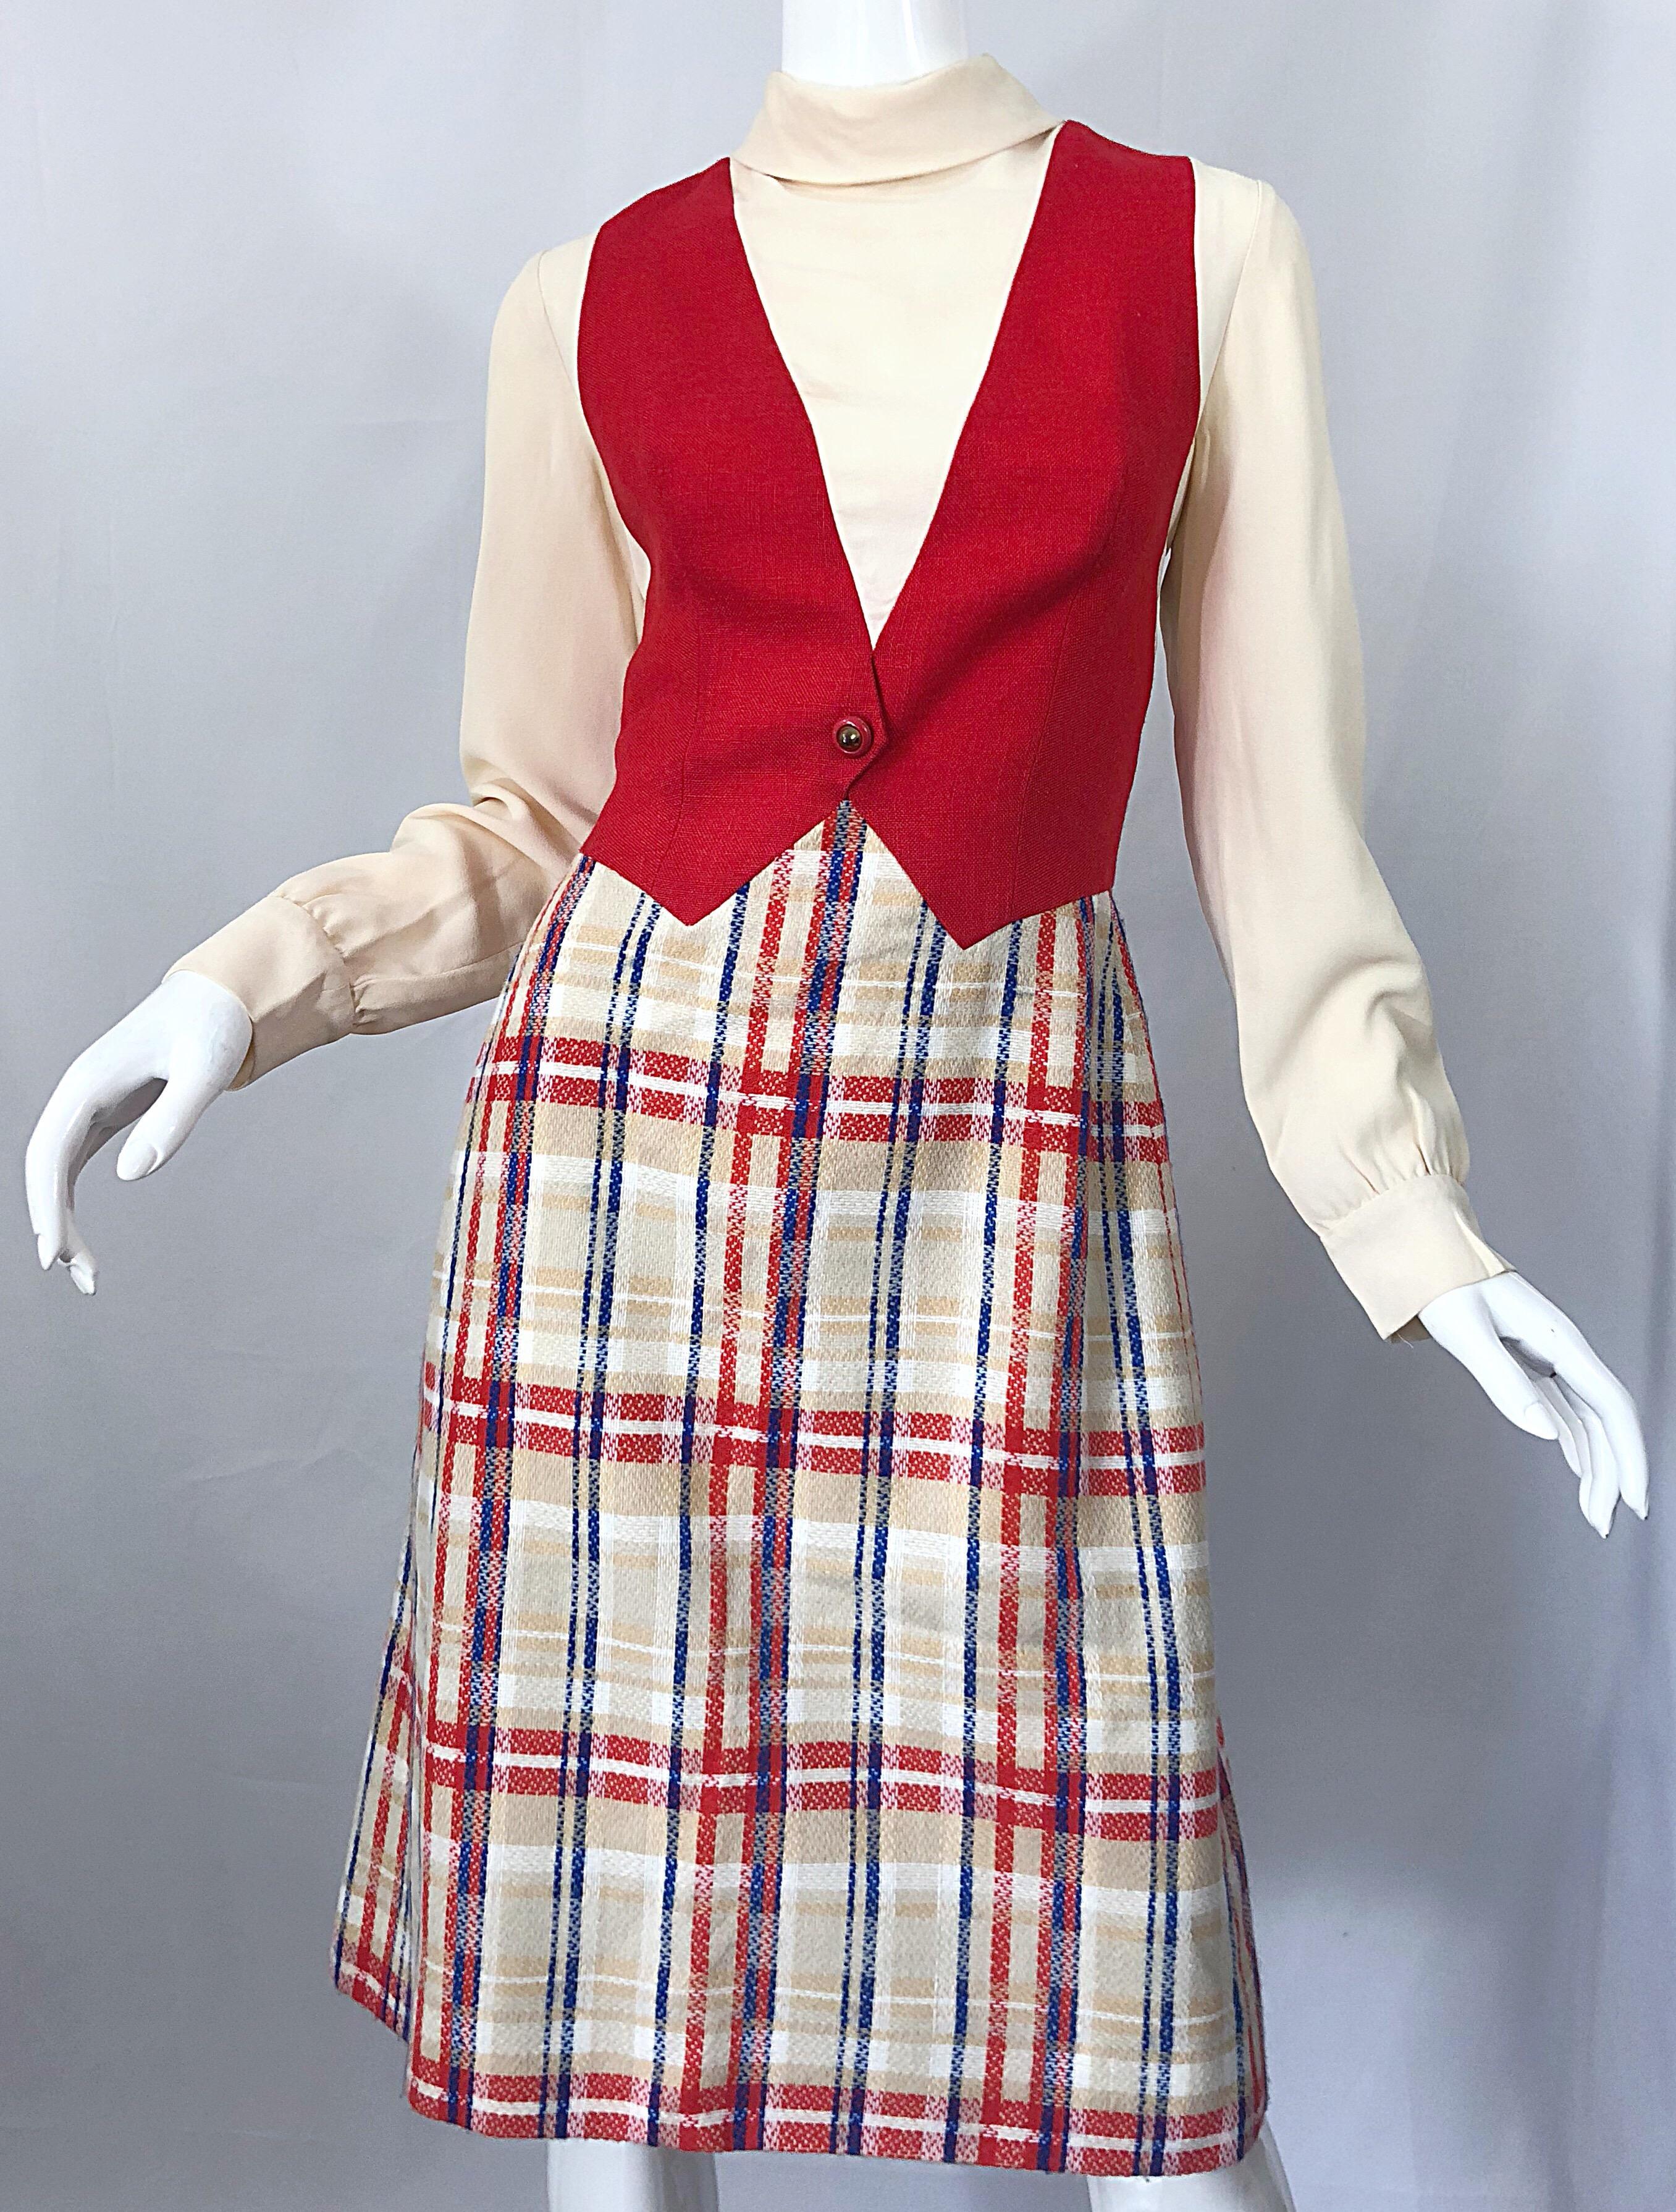 Chic 1960s Pat Sandler Trompe l'Oeil Red White and Blue Vintage 60s A Line Dress In Excellent Condition For Sale In San Diego, CA